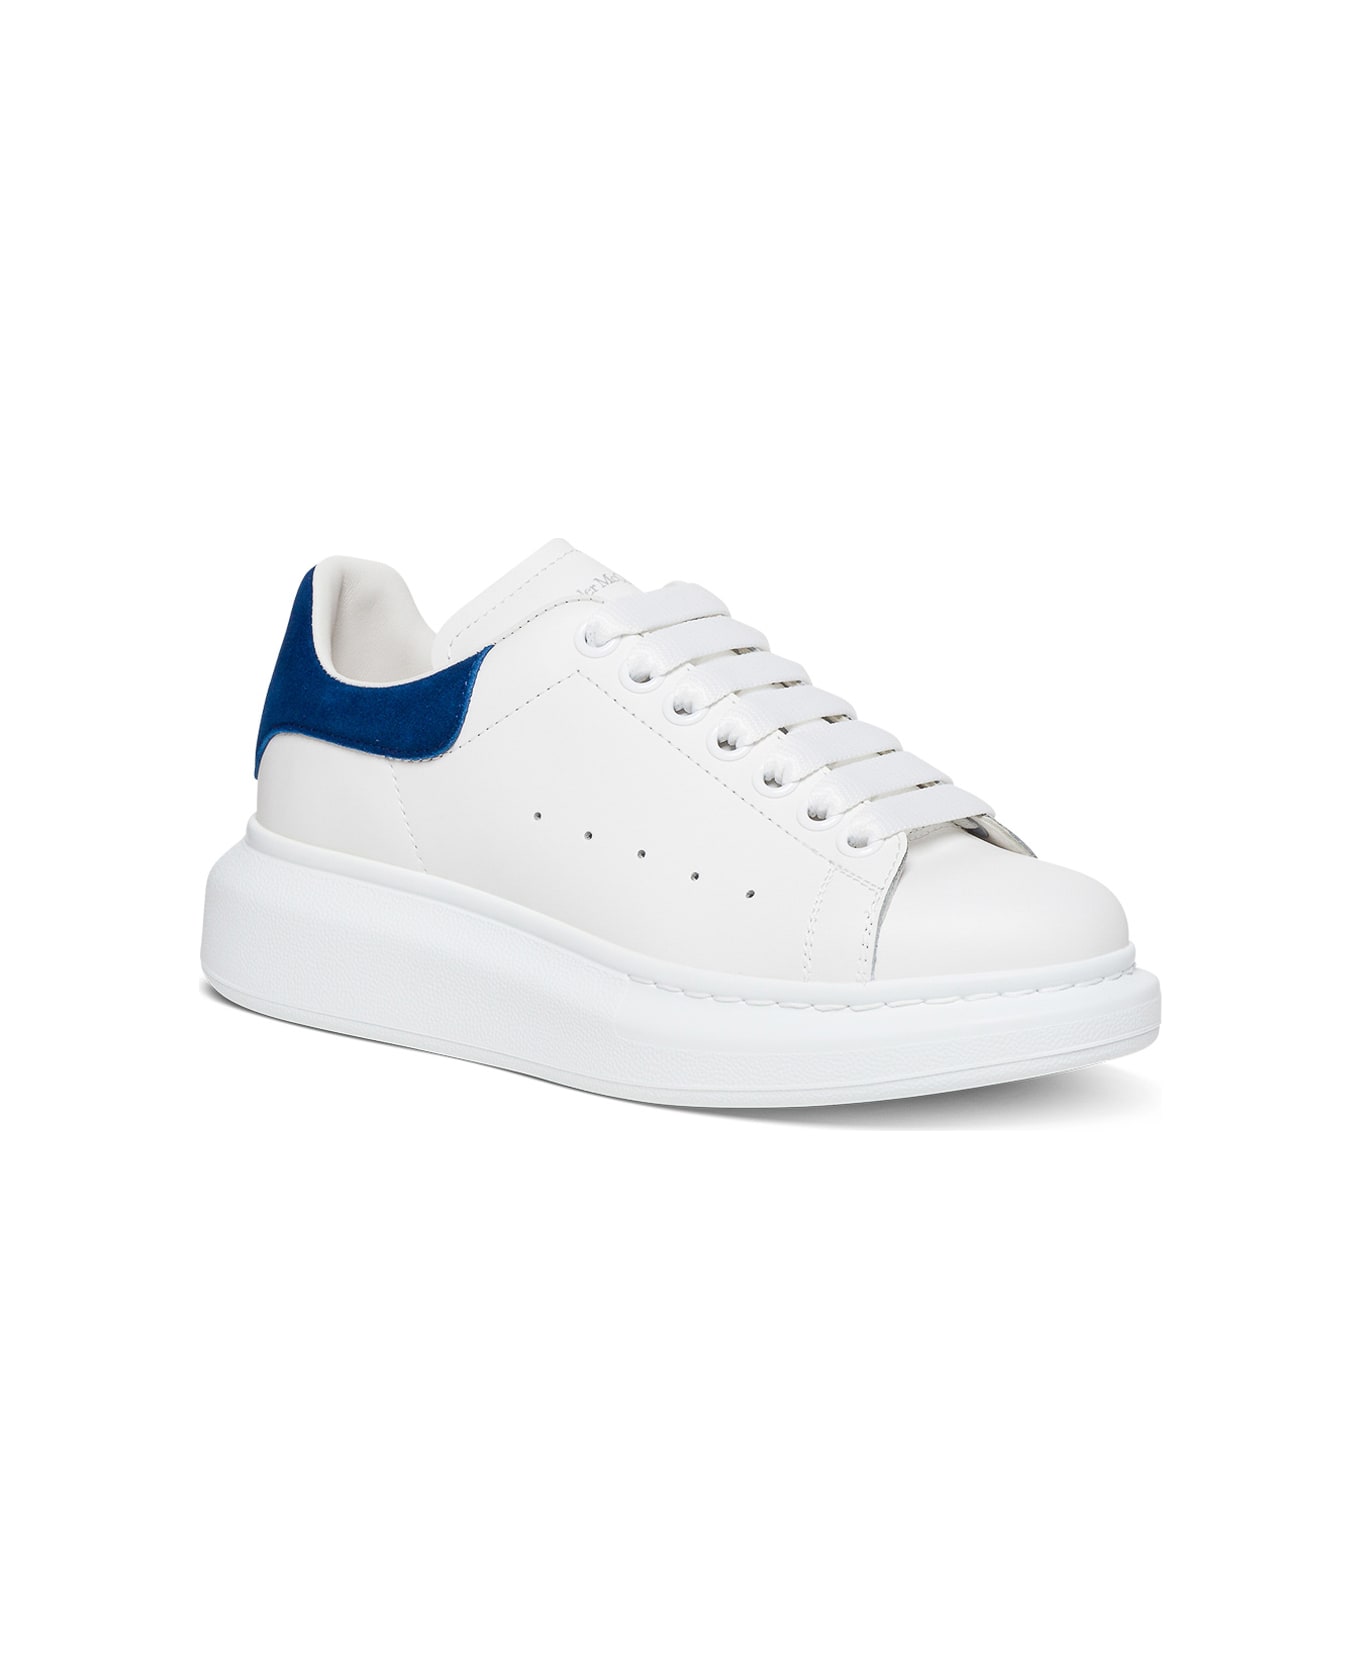 Alexander McQueen Man's Oversize White Leather Sneakers  With Blue Heel And Logo - White